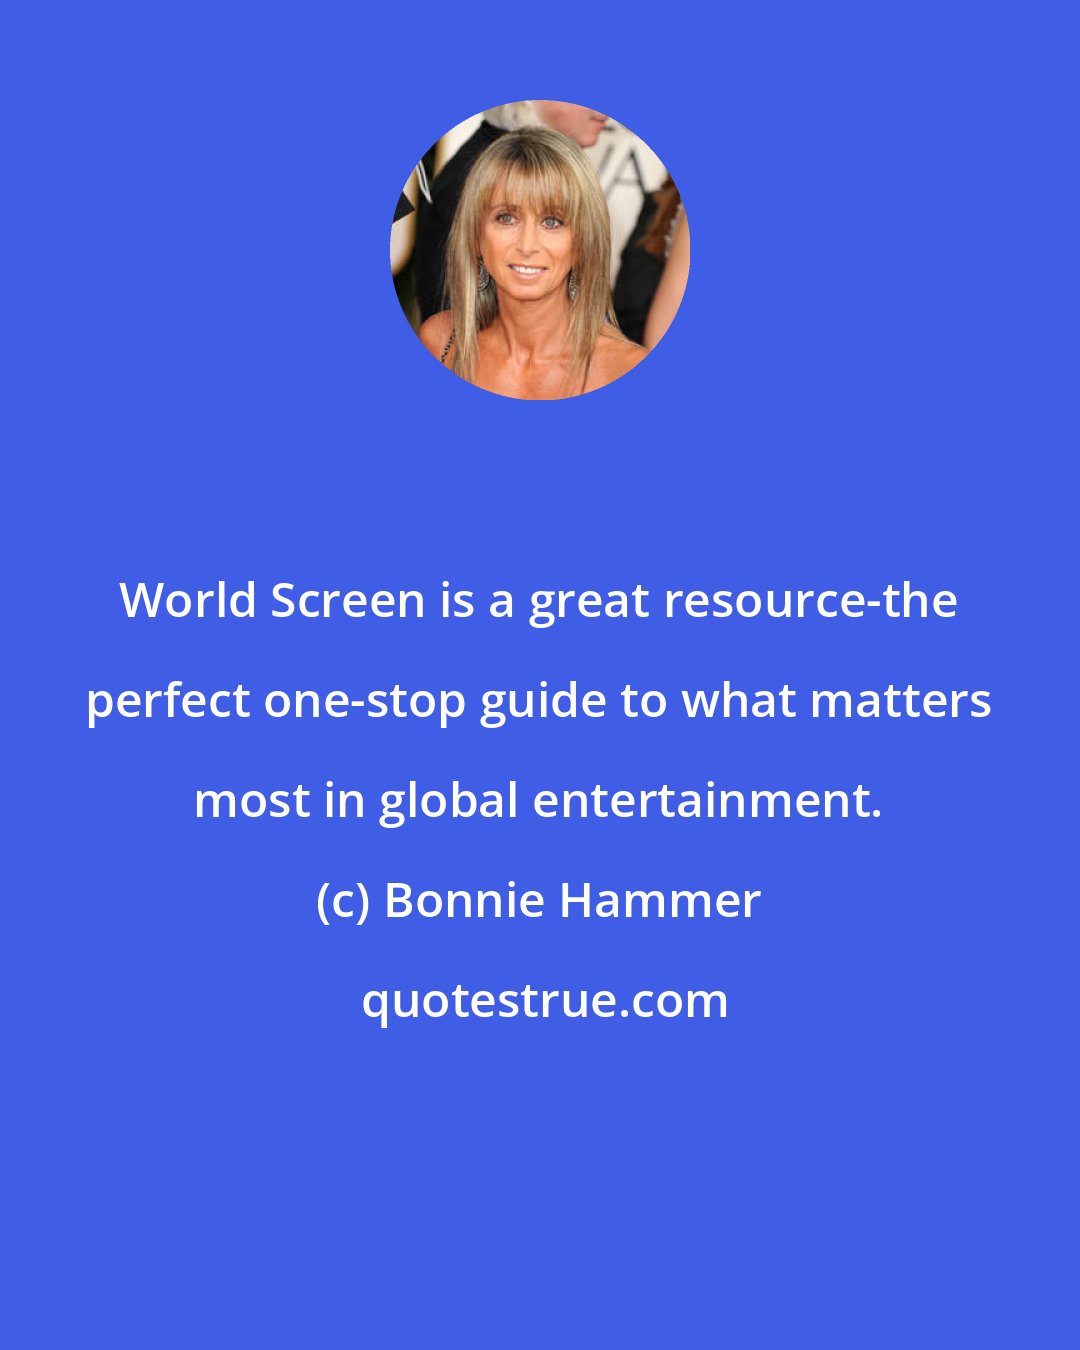 Bonnie Hammer: World Screen is a great resource-the perfect one-stop guide to what matters most in global entertainment.